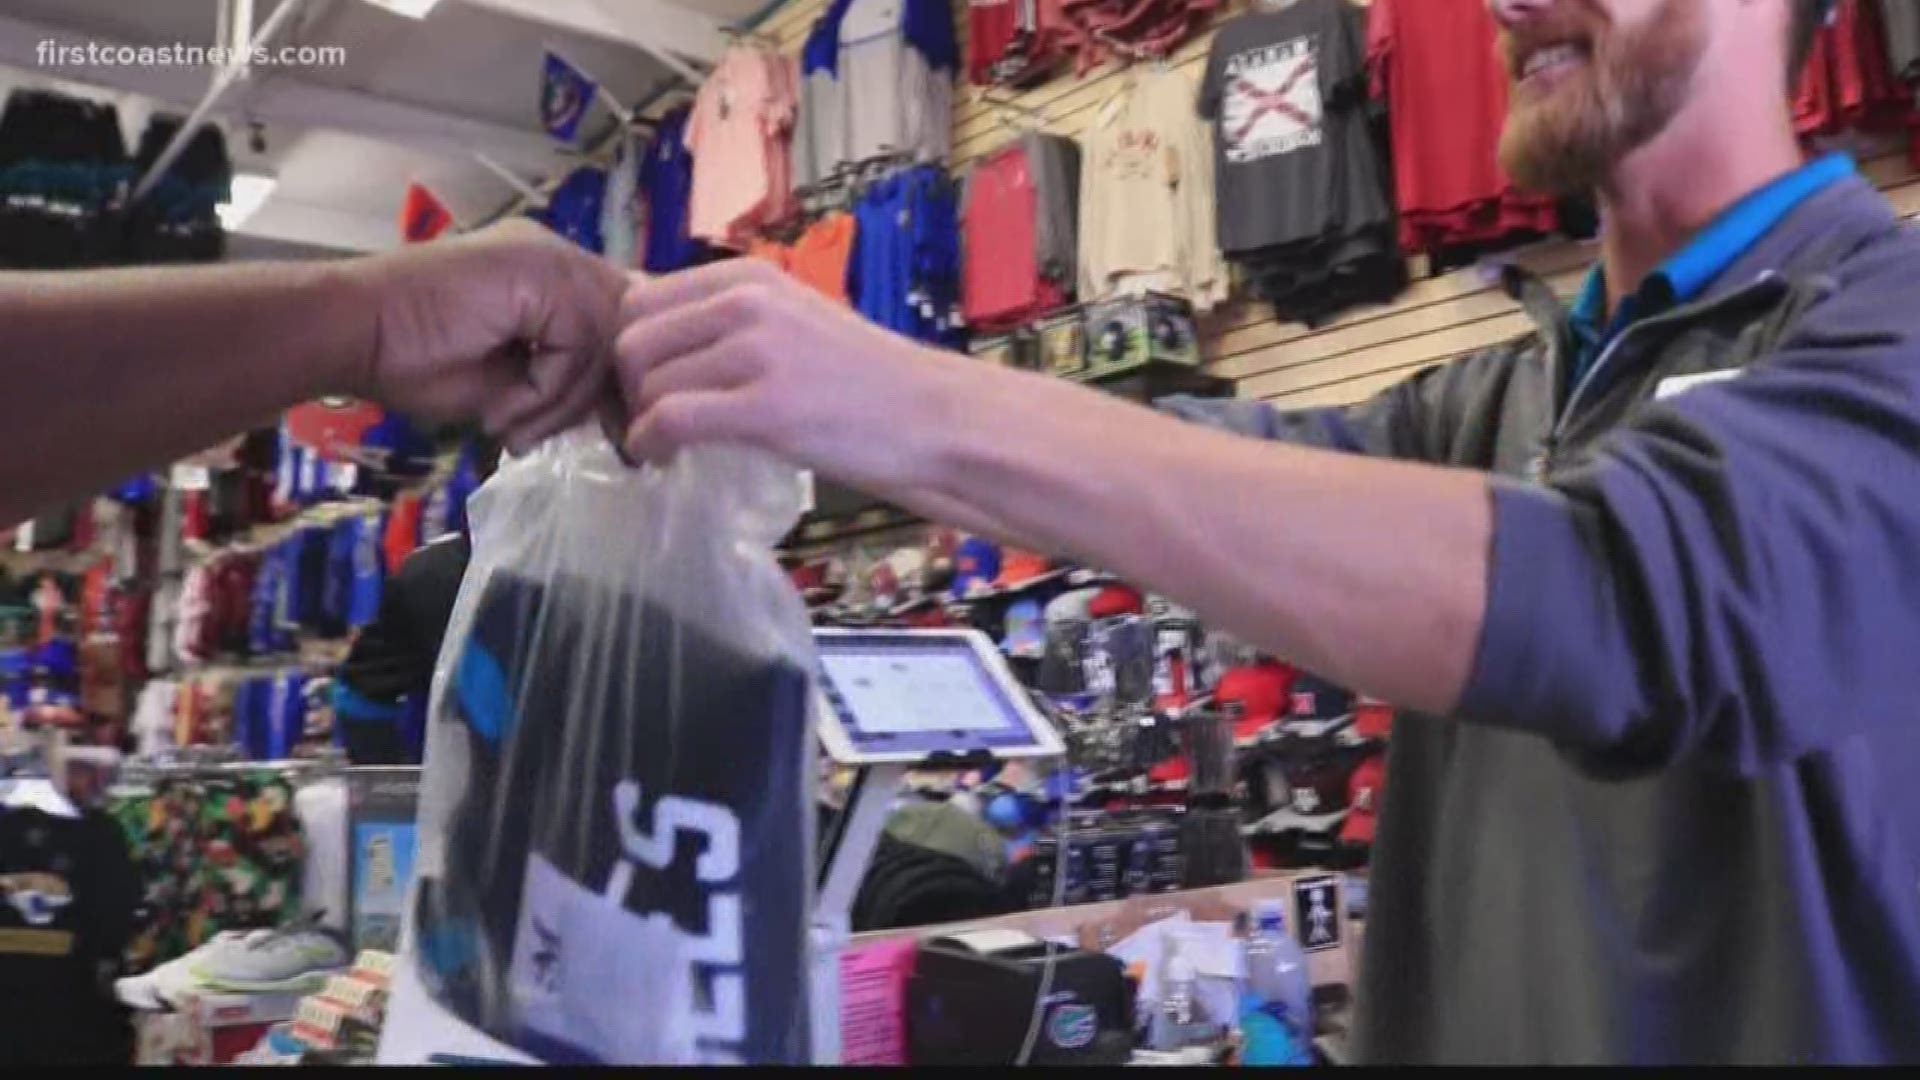 The number seven jersey is finally for sale in Jacksonville, with SportsMania being one of the firsts to stock up.